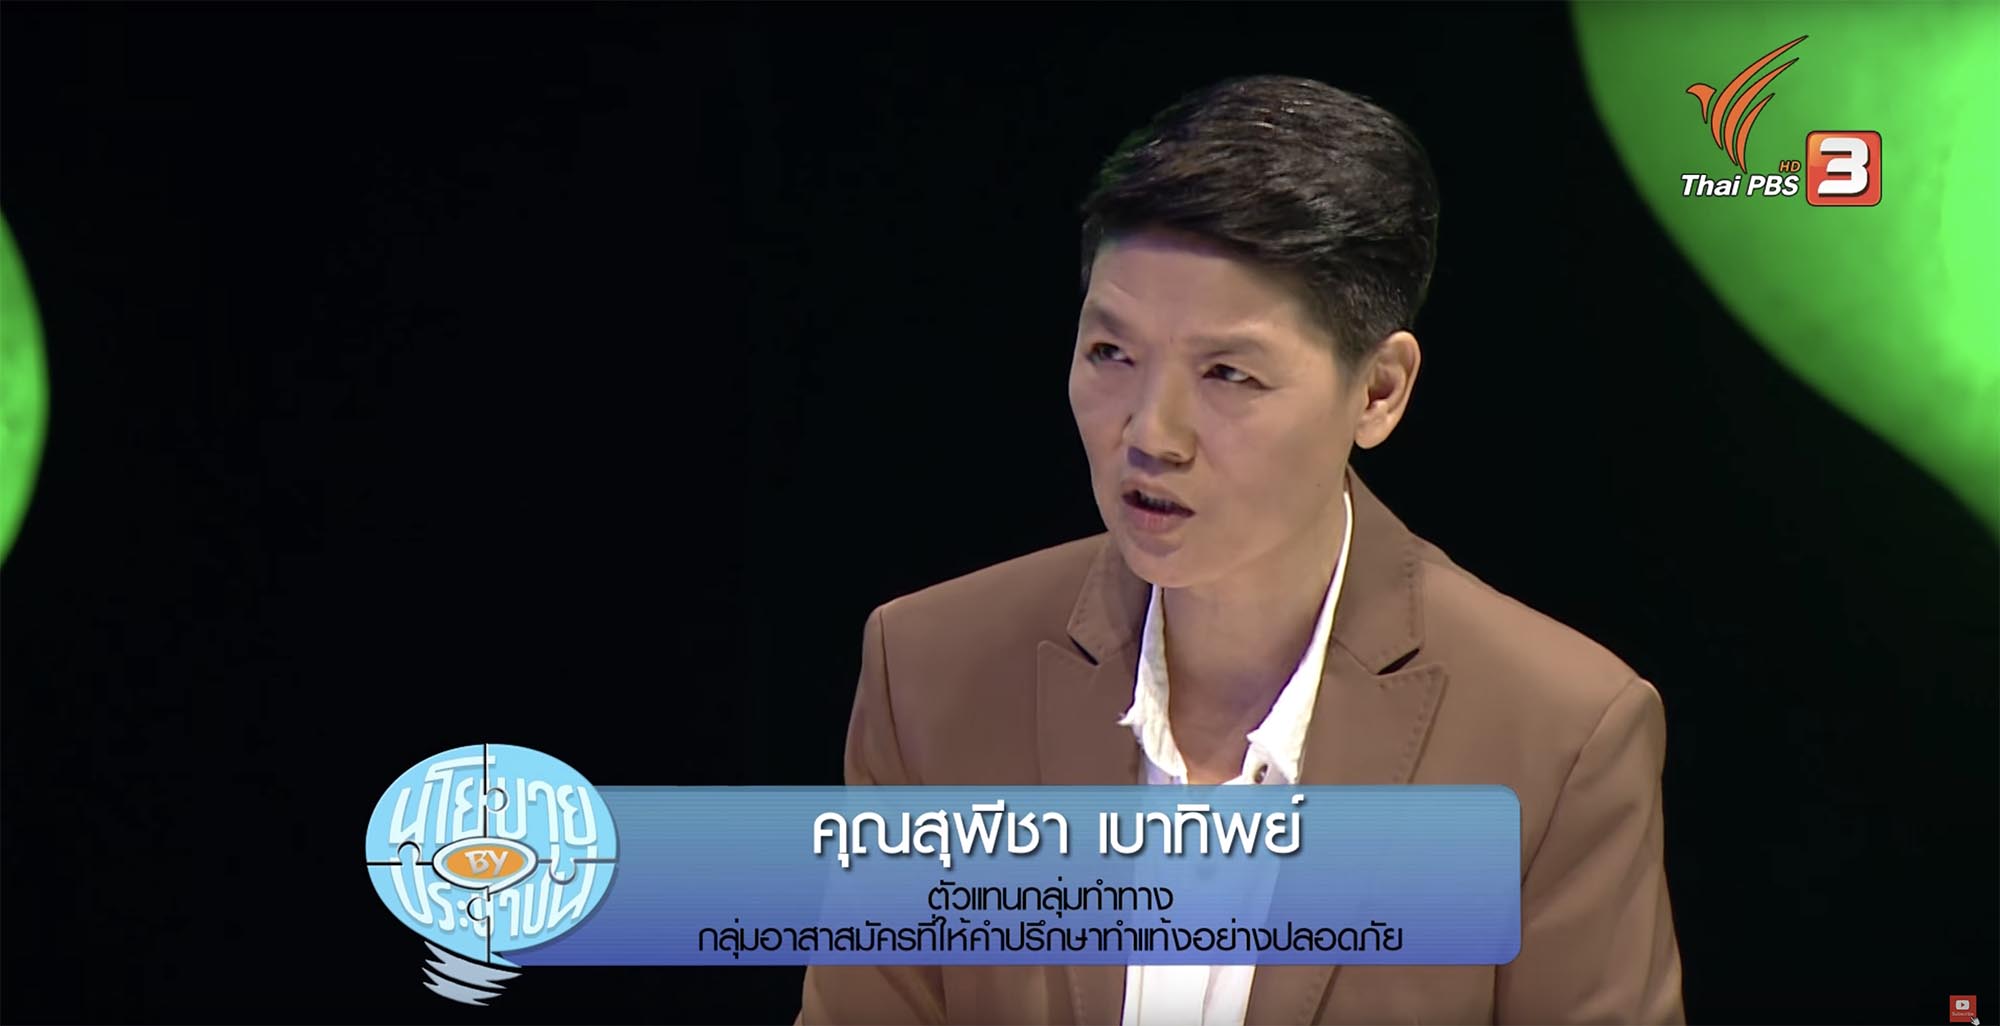 Supecha fighting for the rights to safe abortions on a debate show by Thai PBS debate, Policy by the People. Screenshot: Youtube/ Thai PBS